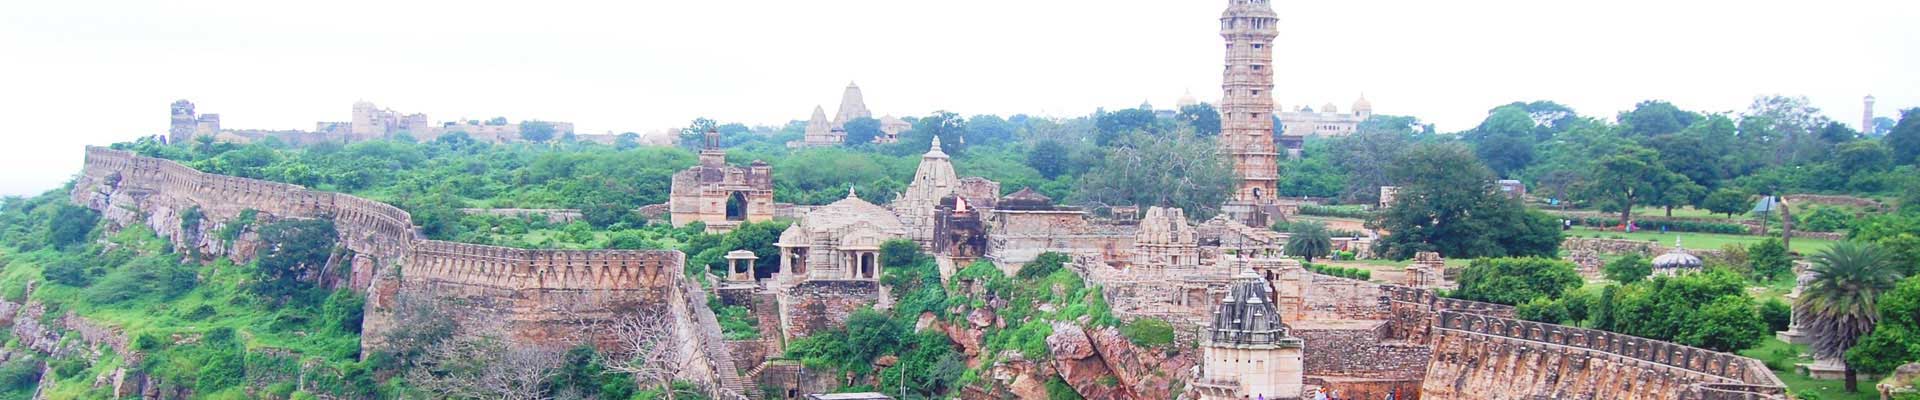 Taxi Service For Chittorgarh Day Tour